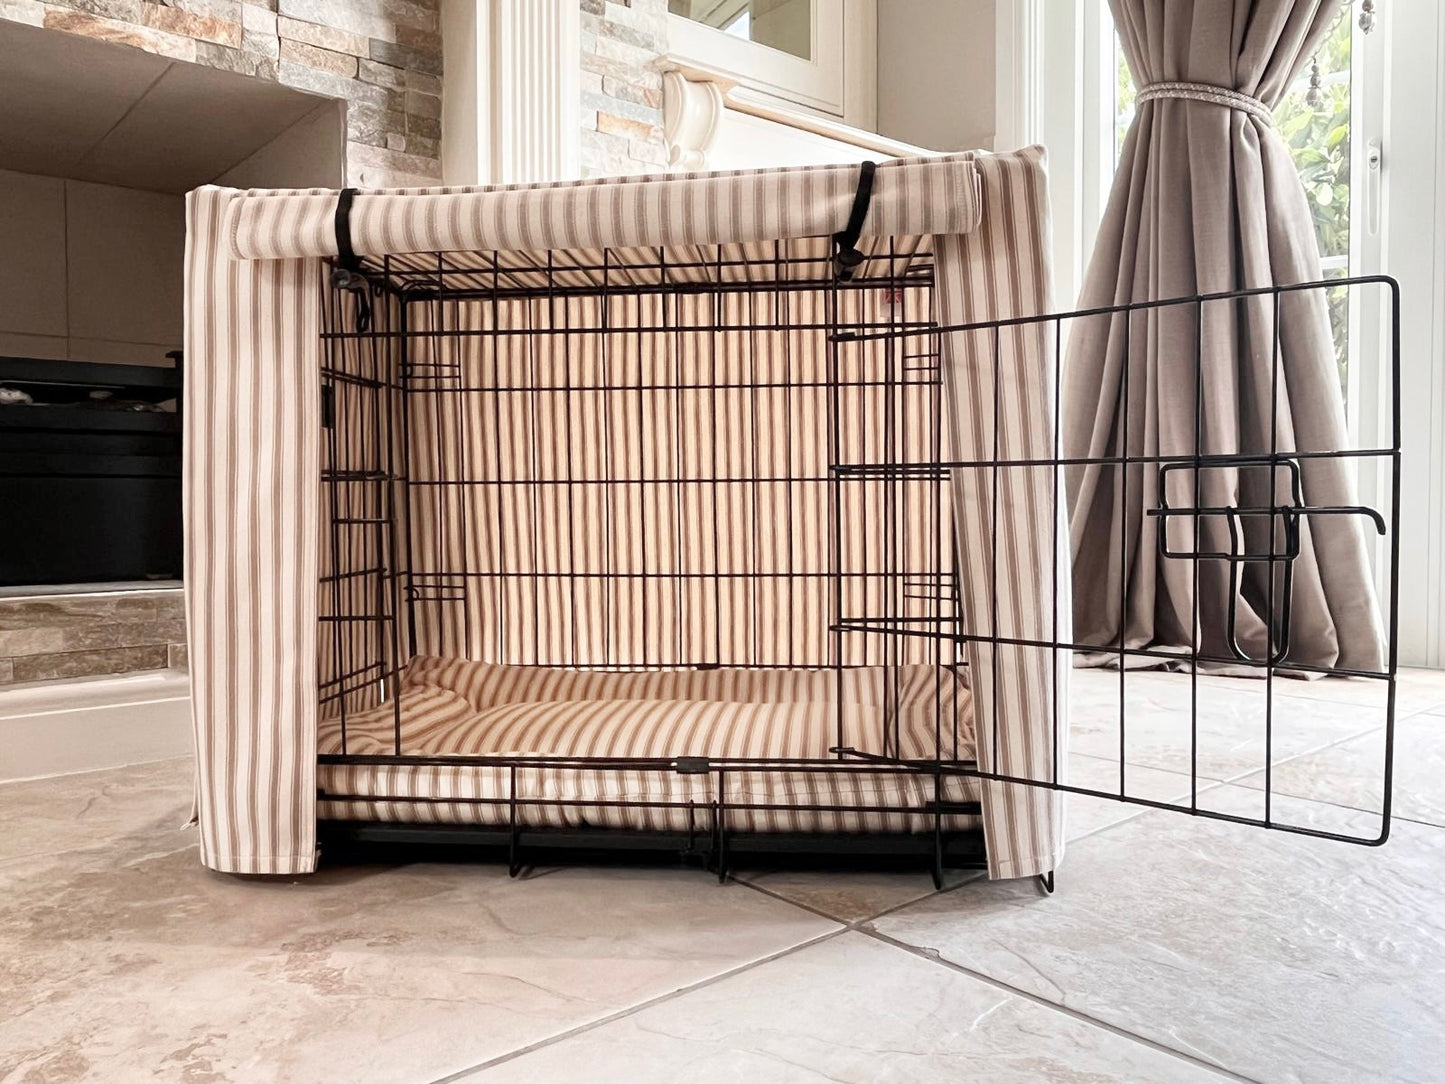 Posh Poos Dog Cage Cover In Heritage Stripe